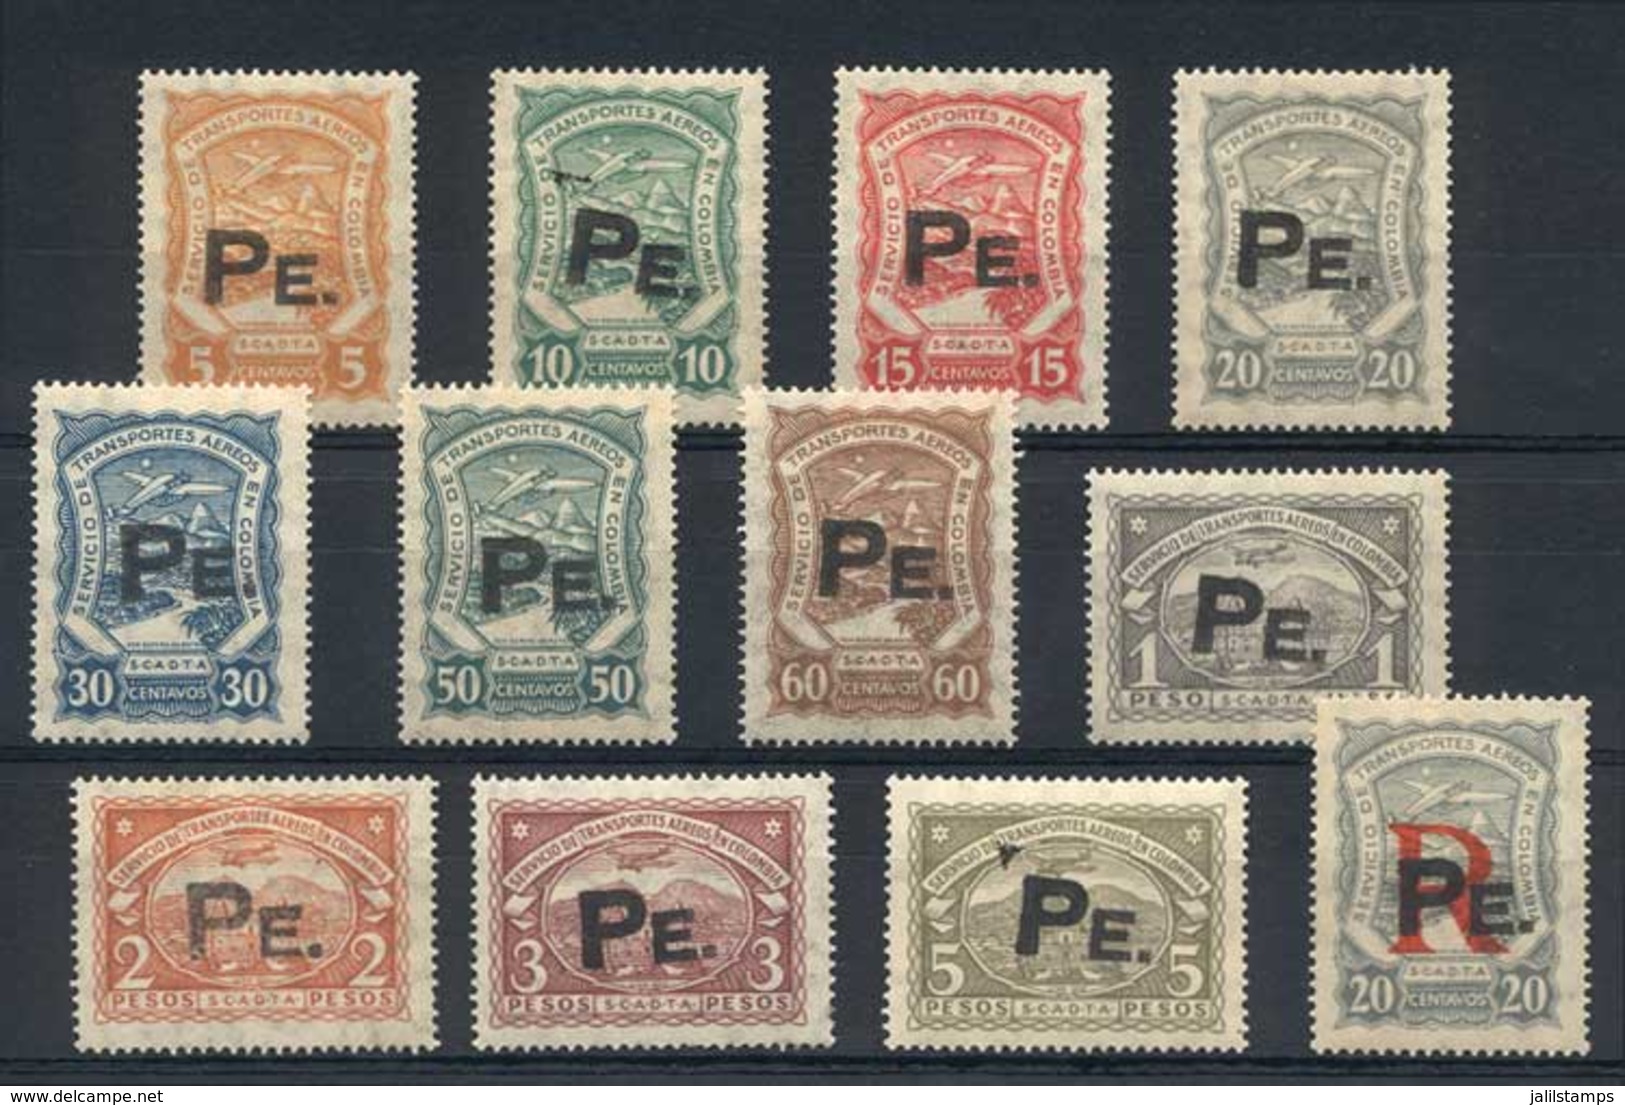 COLOMBIA: Scott CLPE1/CFLPE1, 1923 Complete Set Of 12 Values, Mint Never Hinged With Overprint In Intense Black, Excelle - Kolumbien